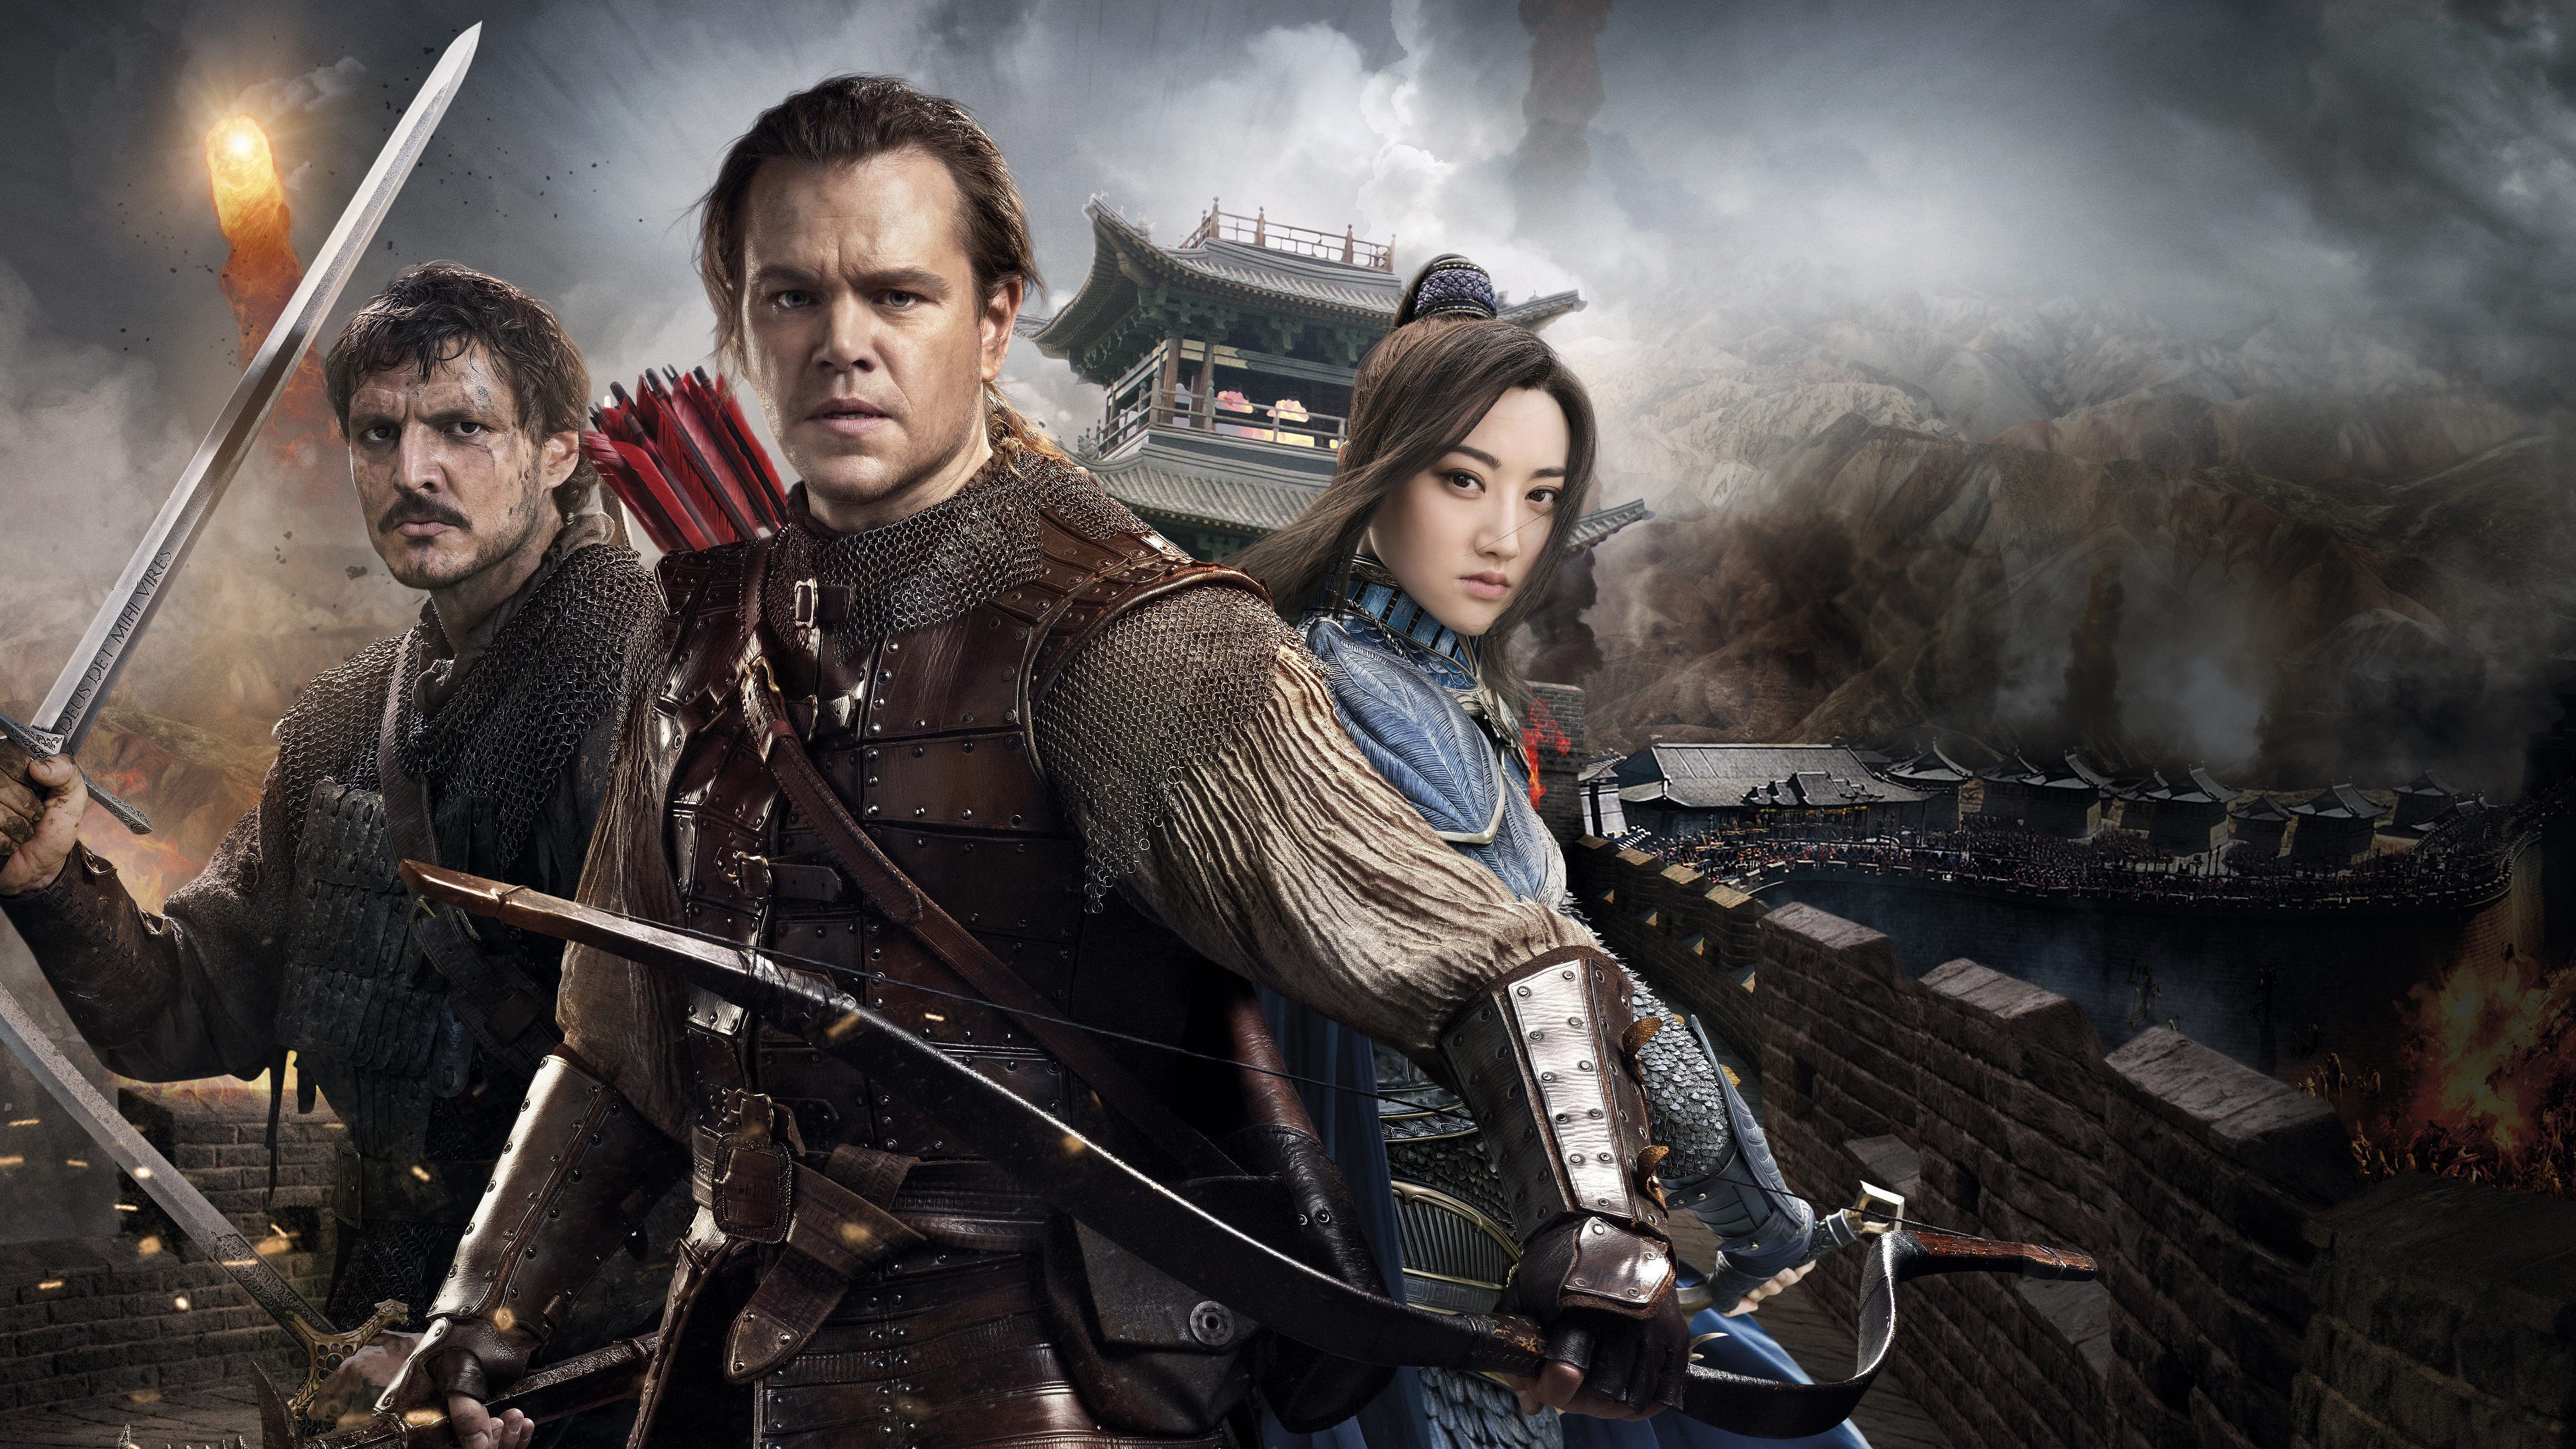 the great wall movie images